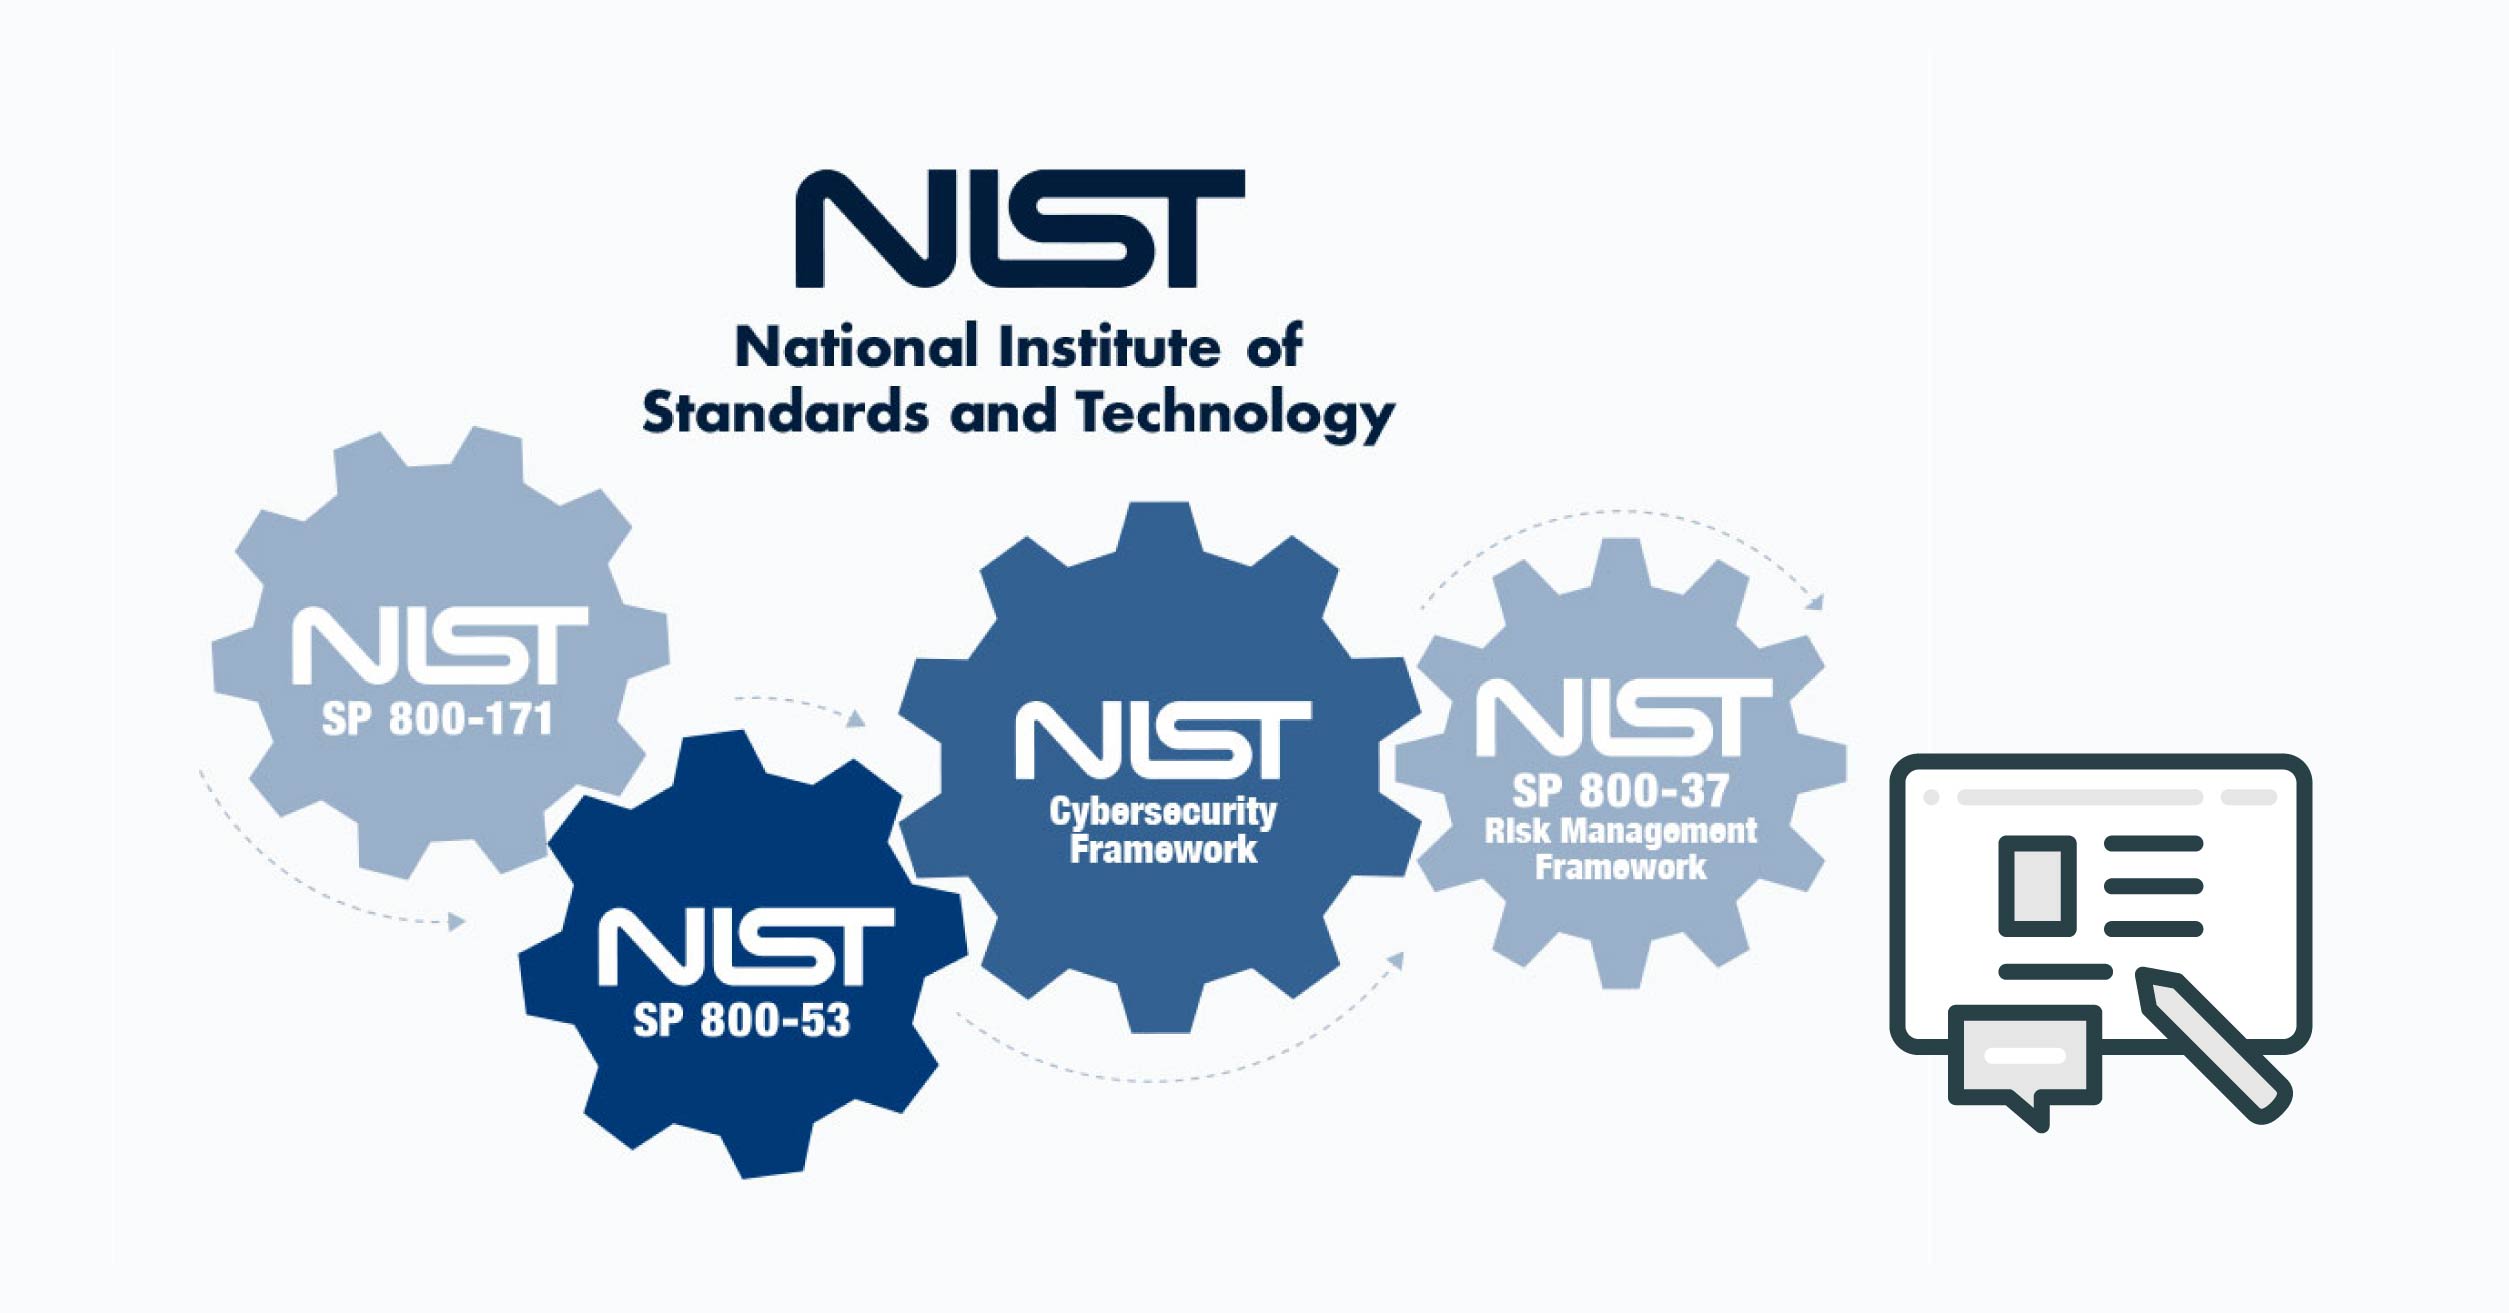 An Overview of NIST Cyber Security Standards